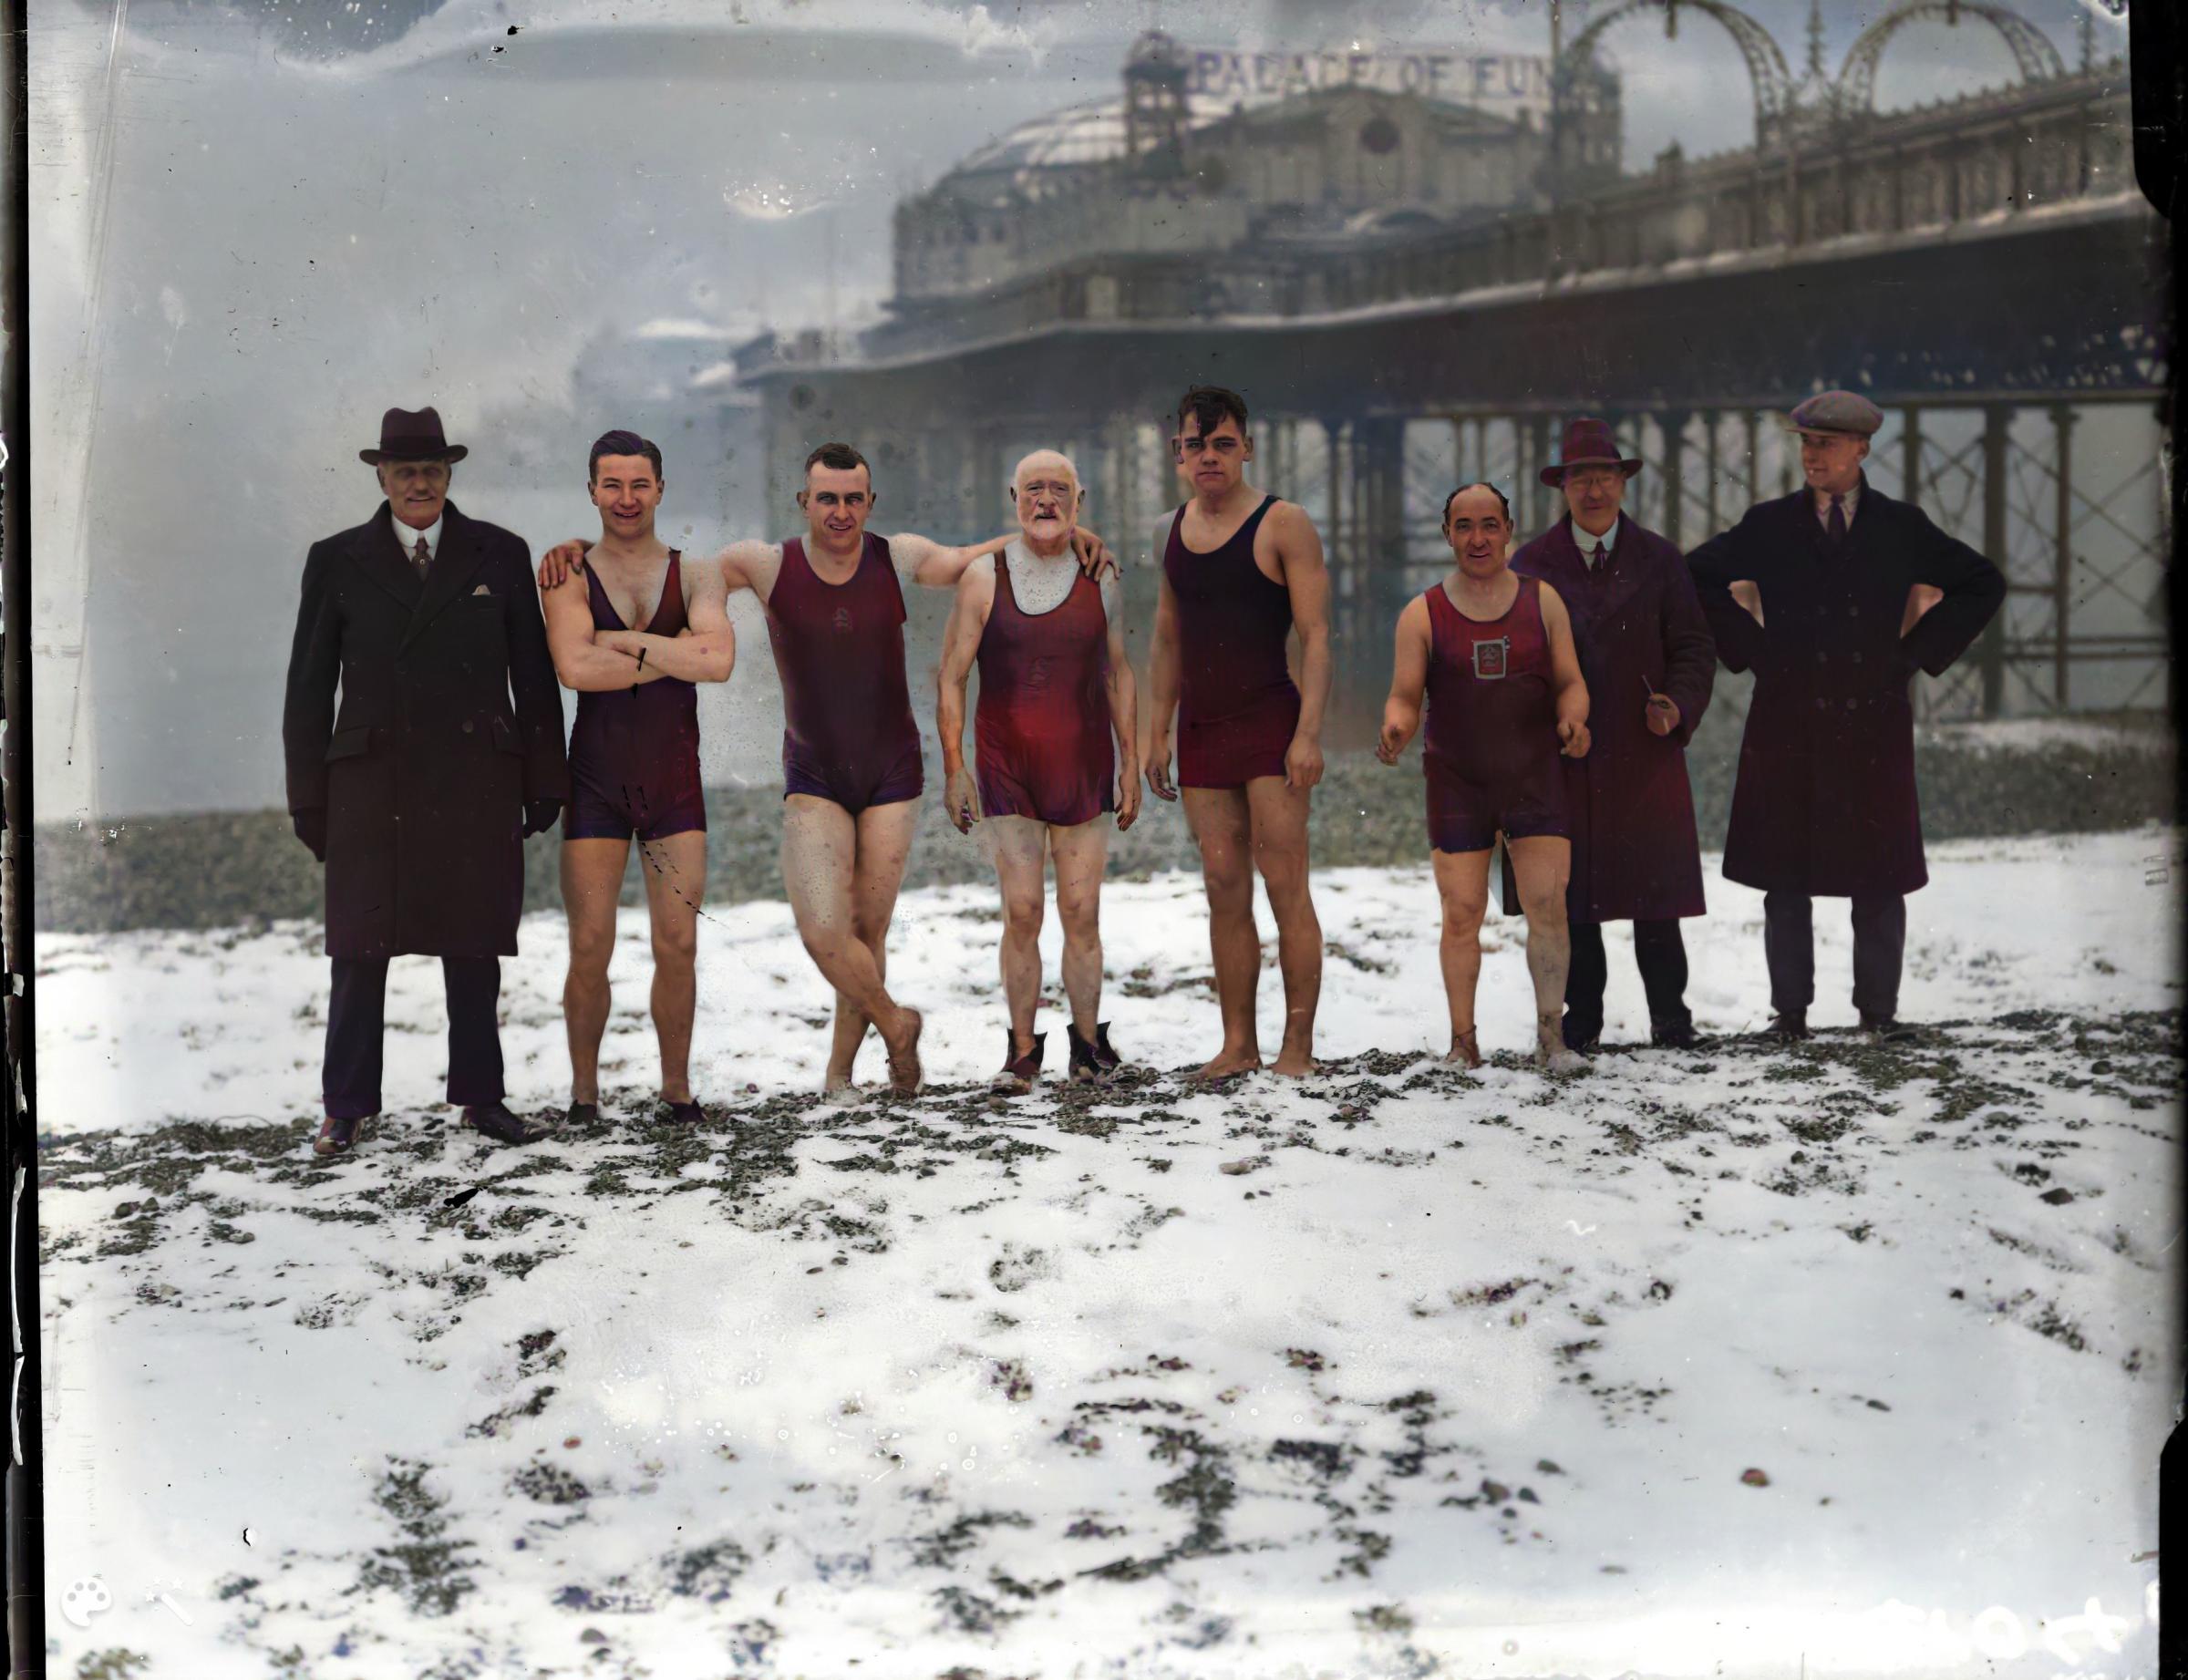 The general consensus is that these are hardy Christmas Day swimmers in Brighton, circa 1929. It’s a scene that has been replicated many times and, while the costumes have changed a lot, the Palace Pier looks reassuringly familiar